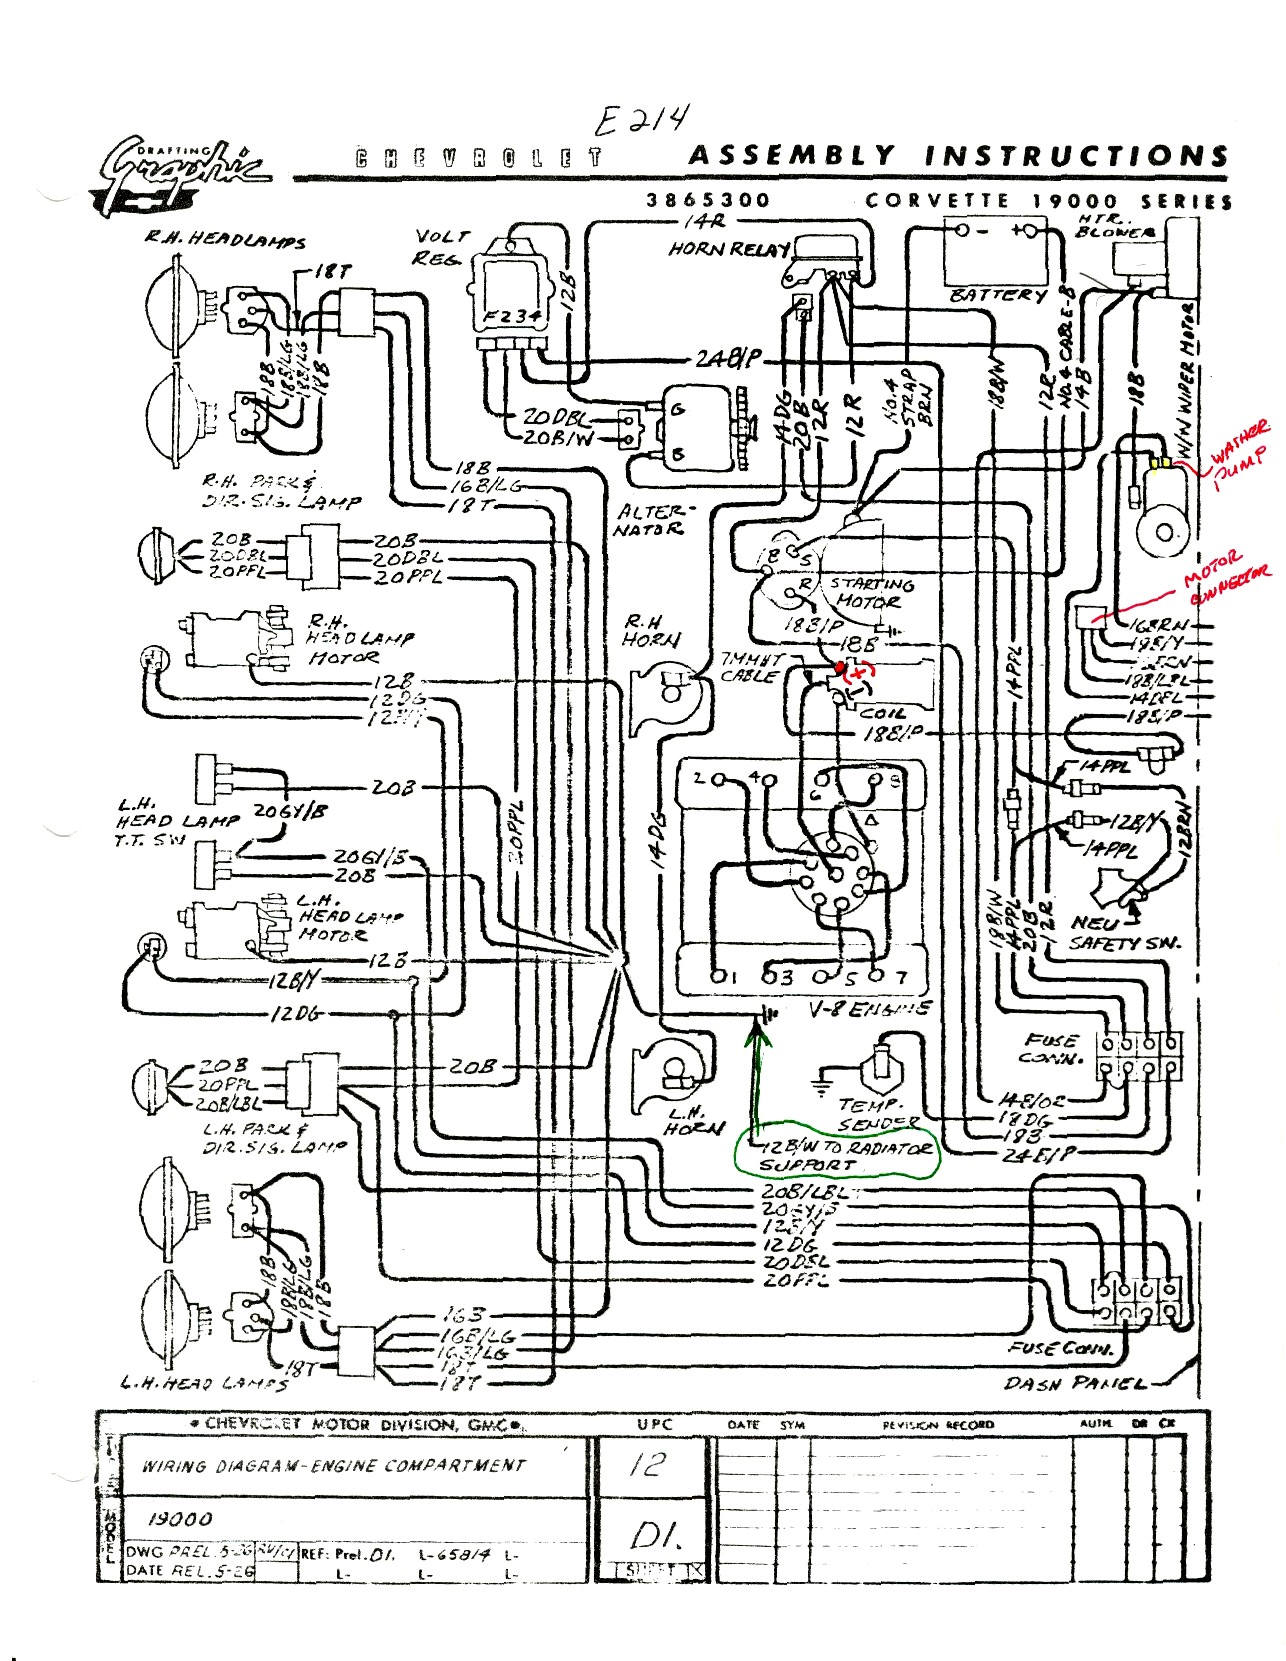 Wiring Diagram For A 1965 Corvette | Get Free Image About Wiring Diagram